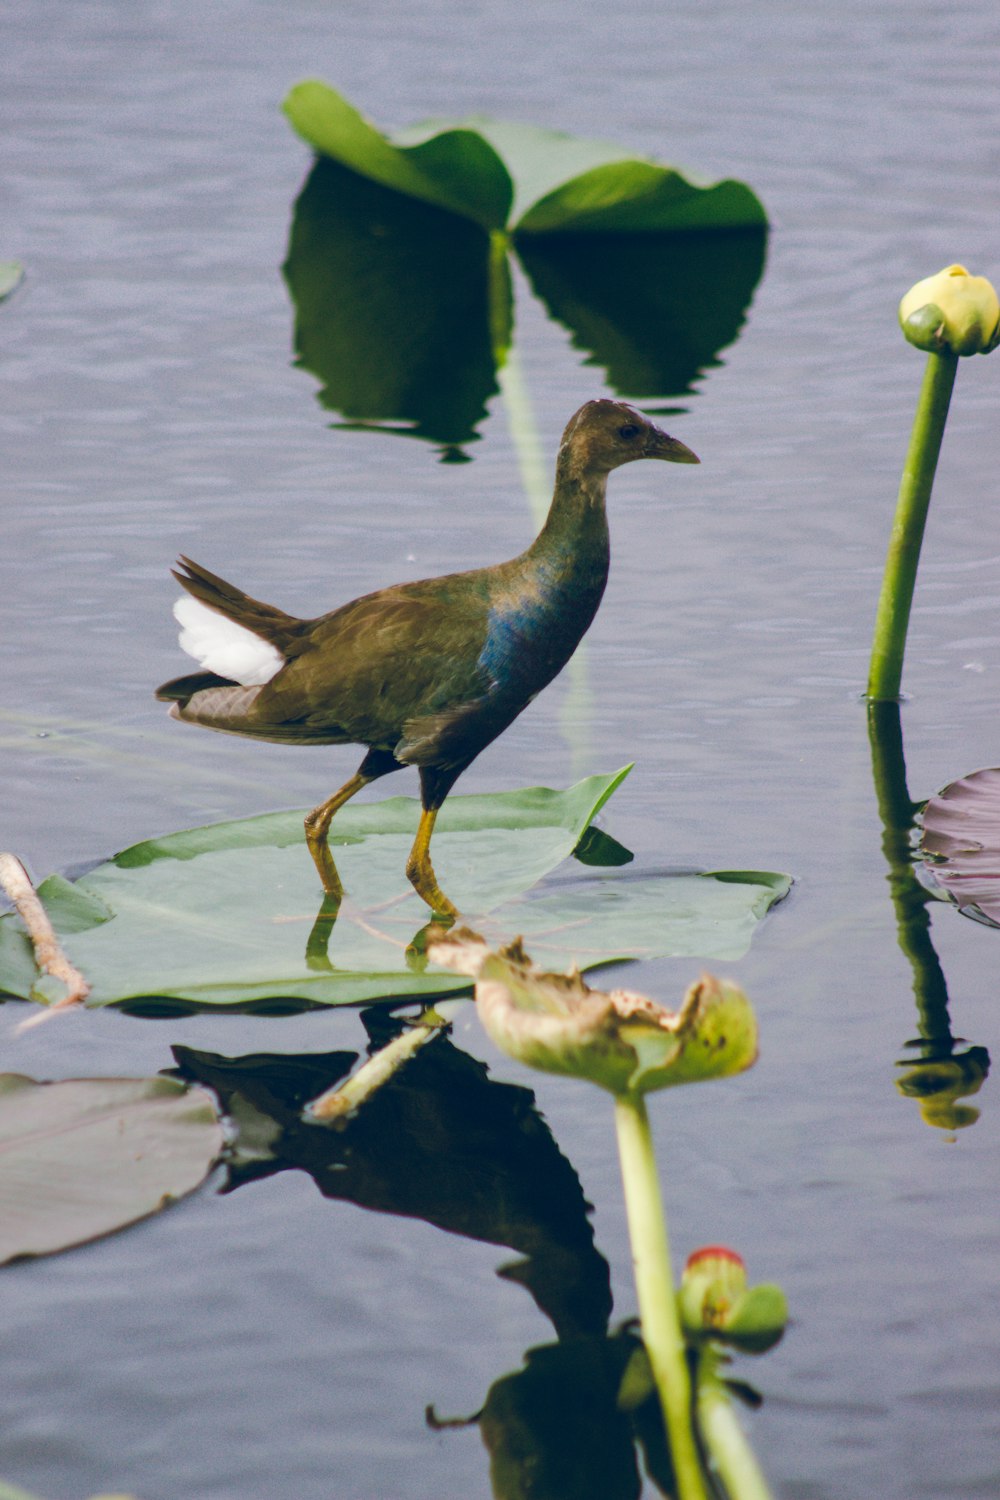 a bird is standing on a lily pad in the water